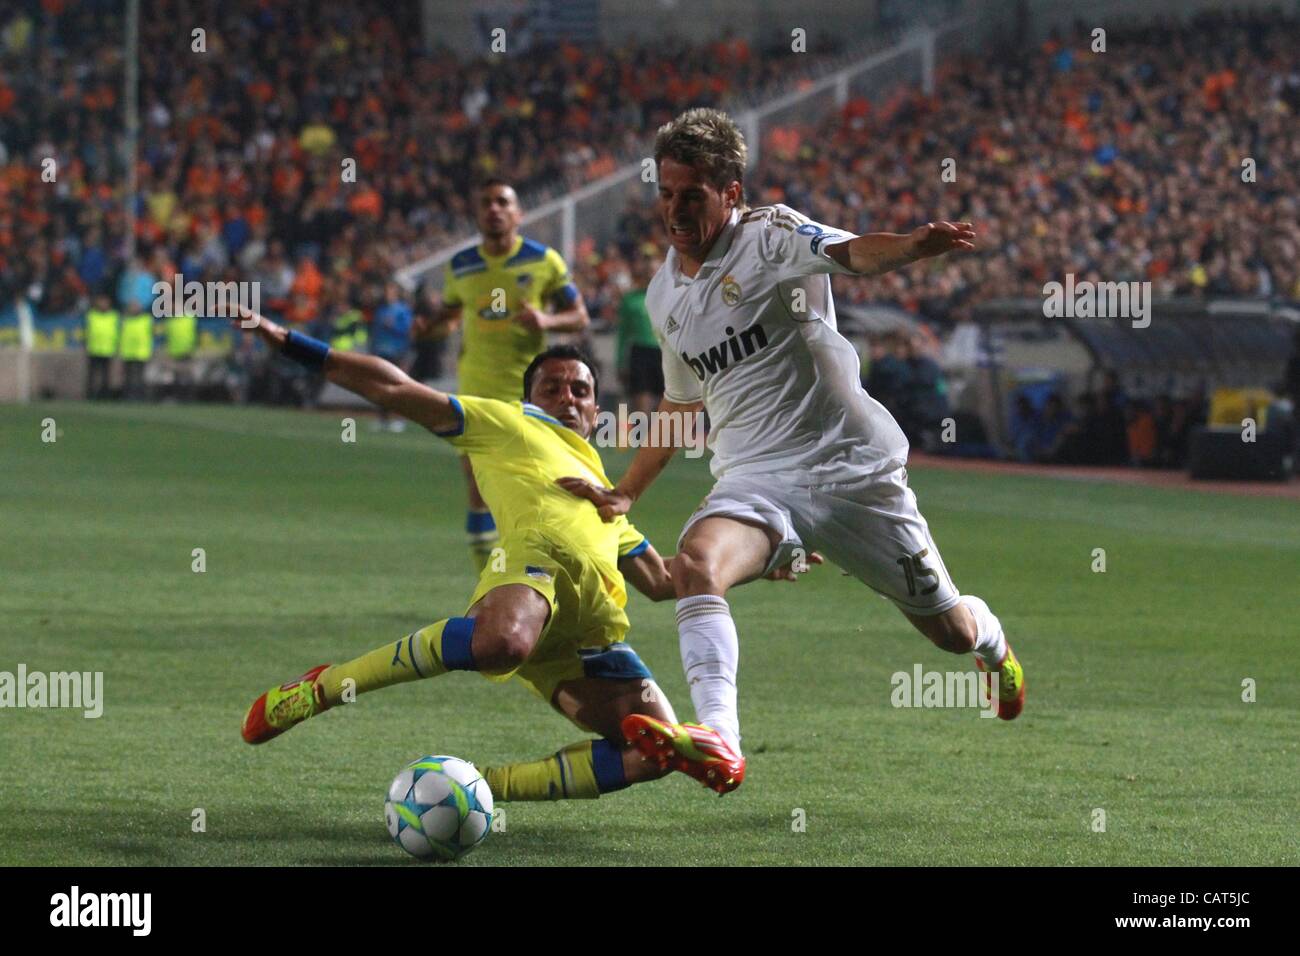 SAvas Poursaitides and Fabio Coentro during the UEFA Champions League quarter final match between Apoel and Real Madrid at GSP stadium on 27th of March in Nicosia, Cyprus Stock Photo